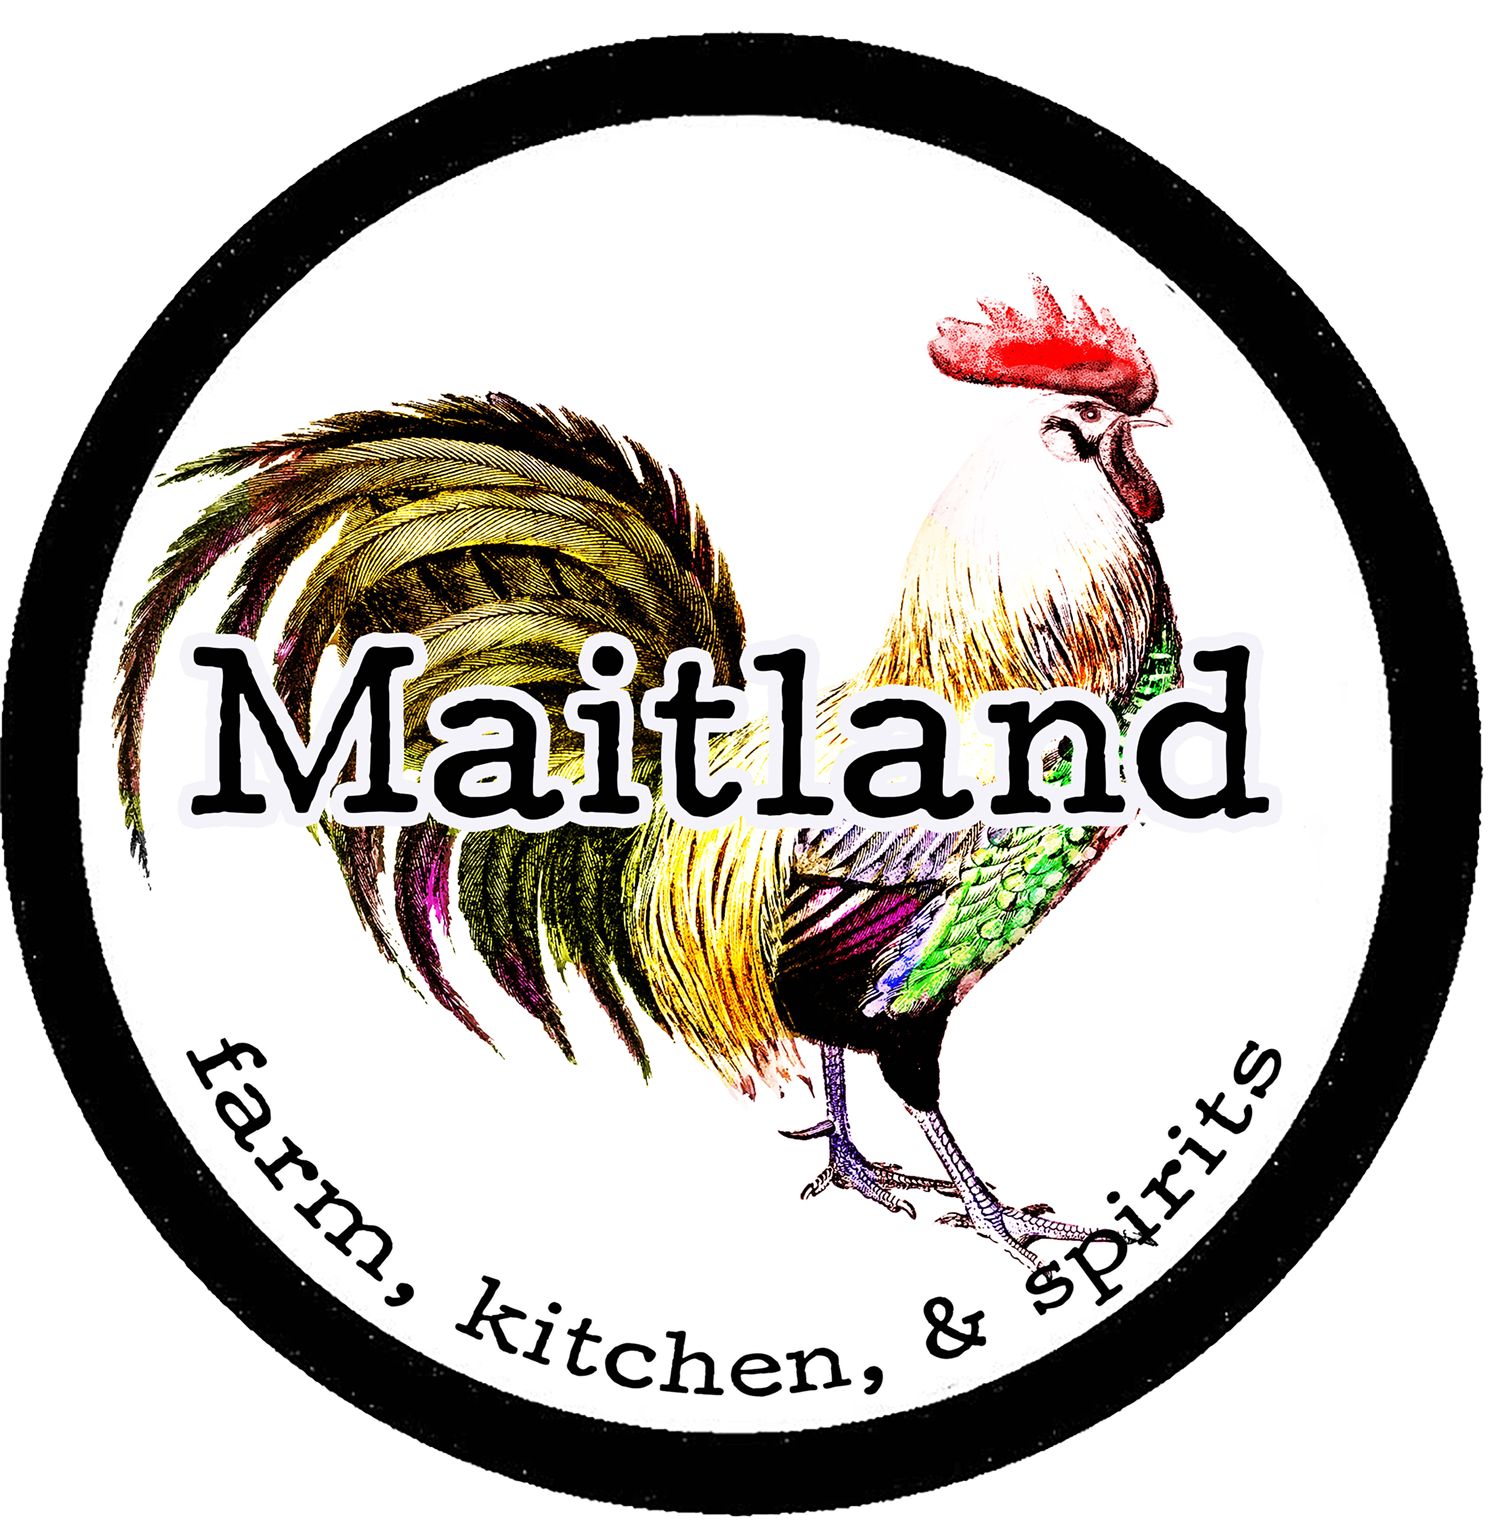 Experience authentic farm-to-table dining at Matland Farm Kitchen & Spirits. Enjoy fresh, locally sourced food and an exquisite range of beverages in a rustic yet modern ambiance.